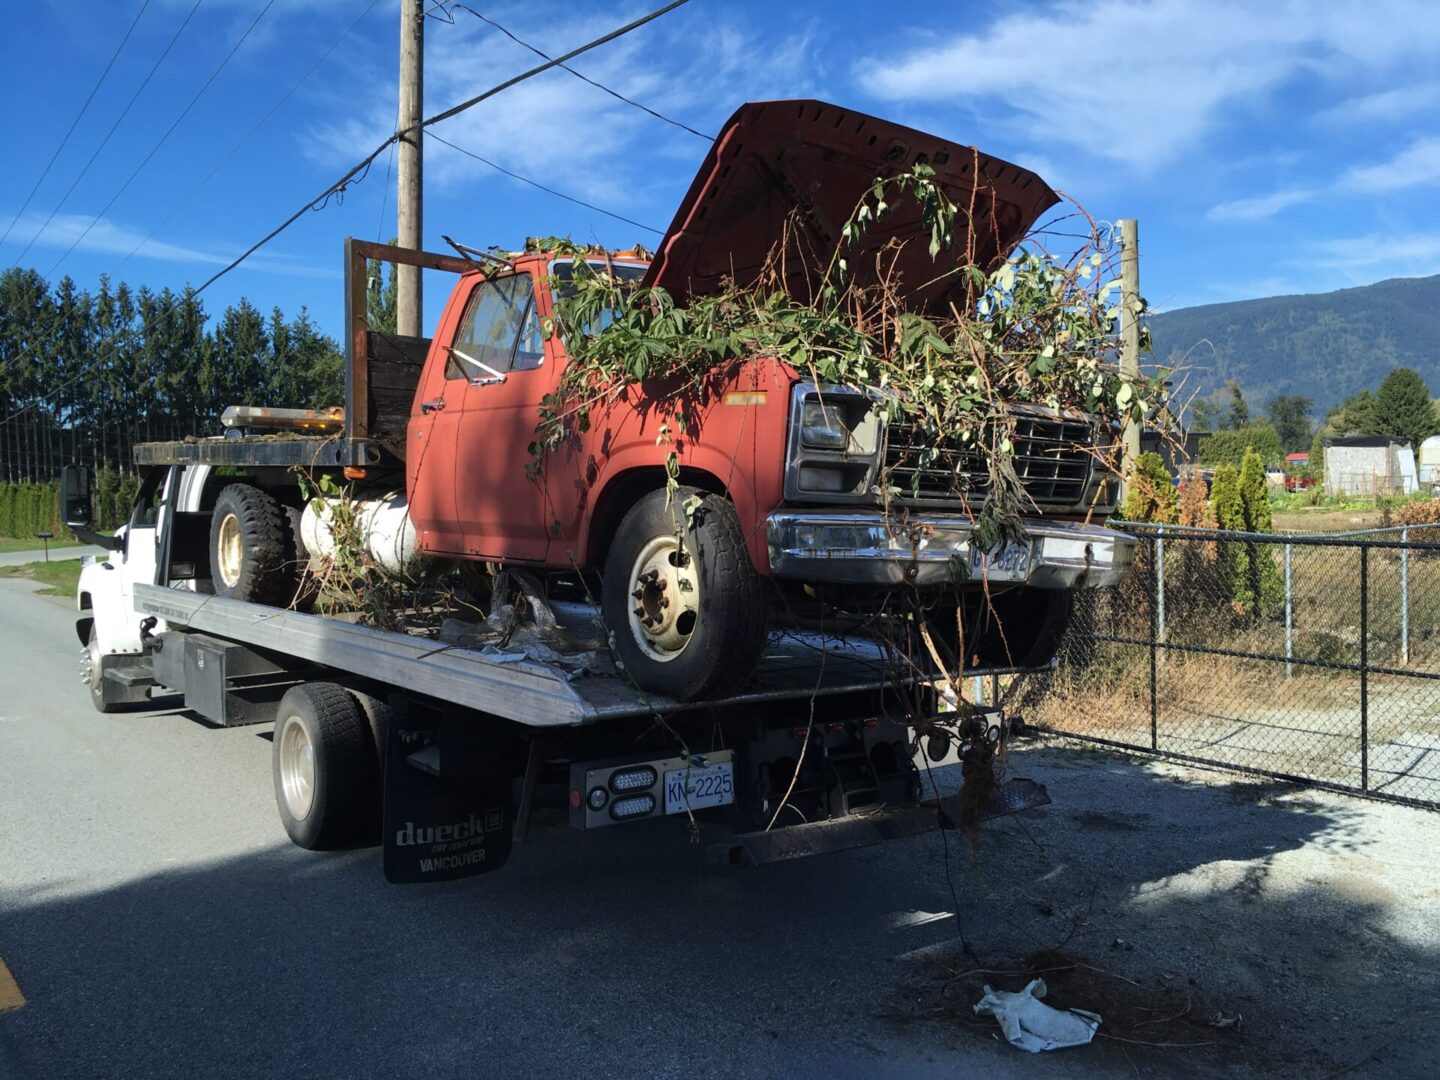 An old red truck, ready for scrap car removal, with an open hood and branches in its bed, loaded onto a flatbed tow truck.